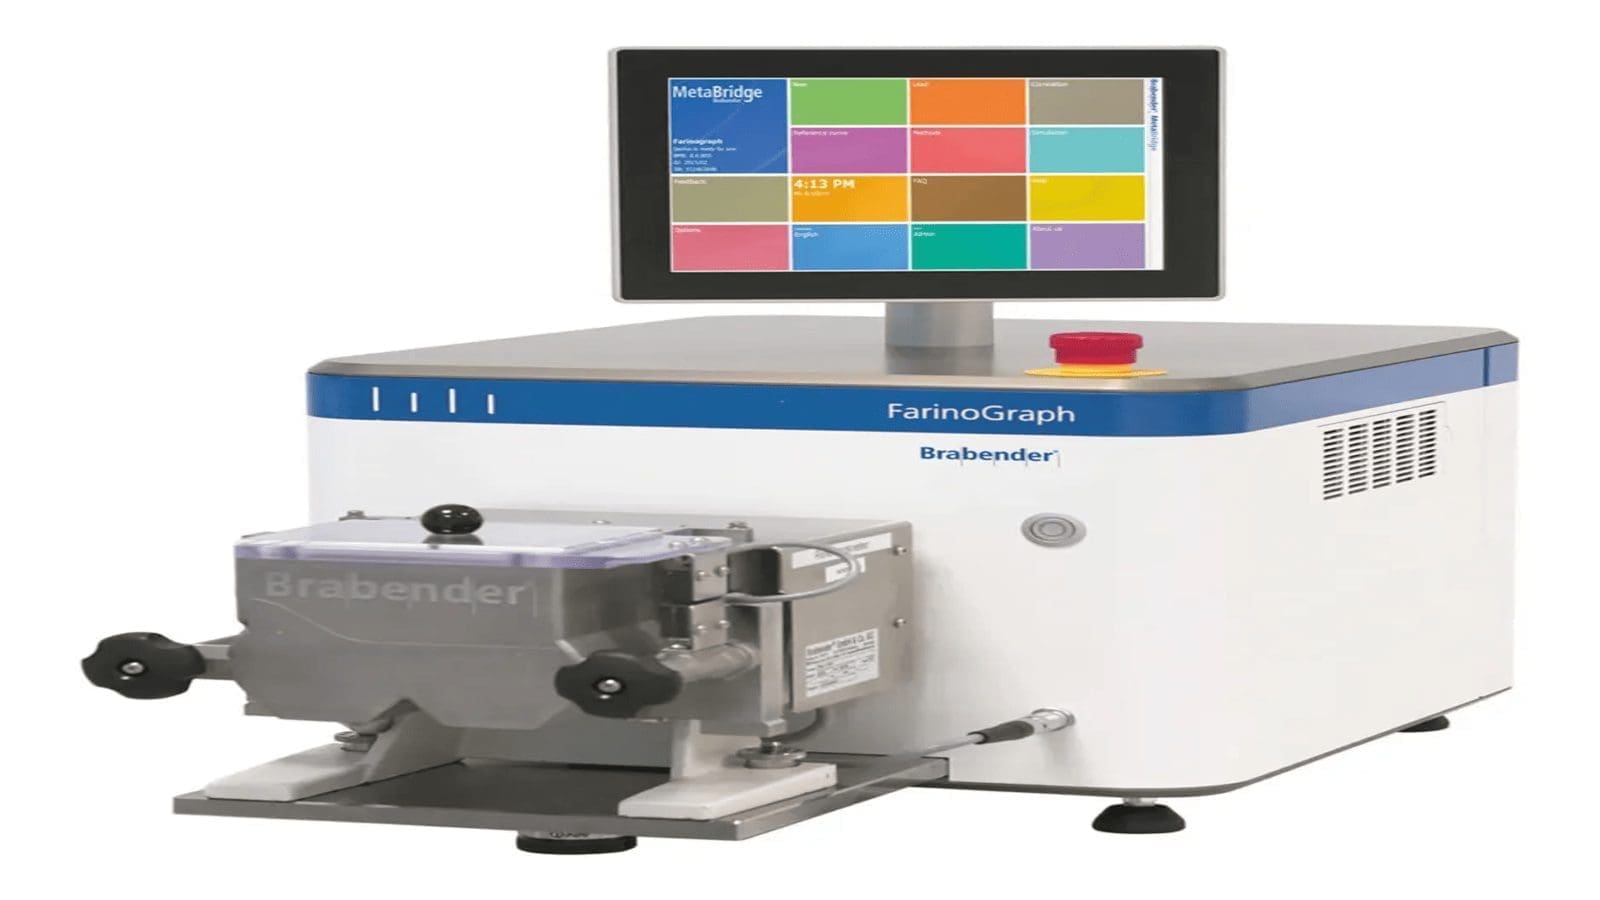 Brabender introduces new FarinoGraph to enhance quality in baking 